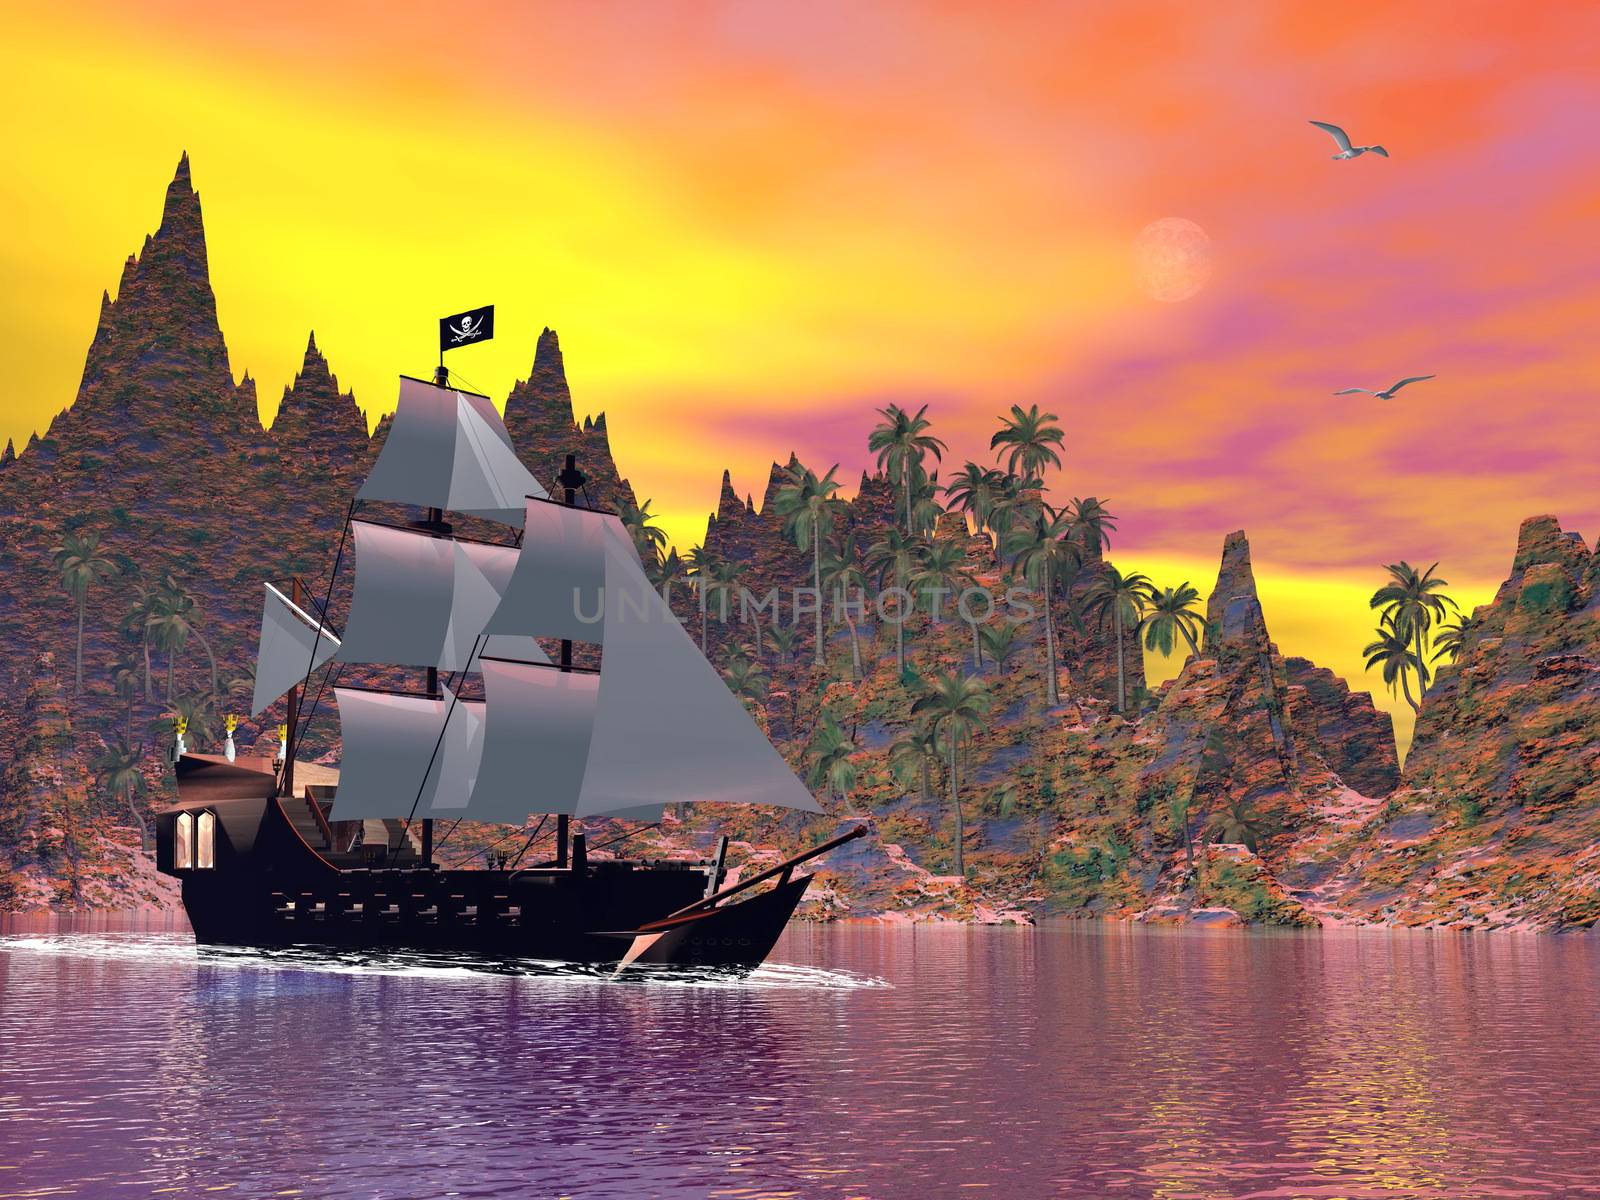 Pirate ship next to the coat by colorful sunset with seagulls